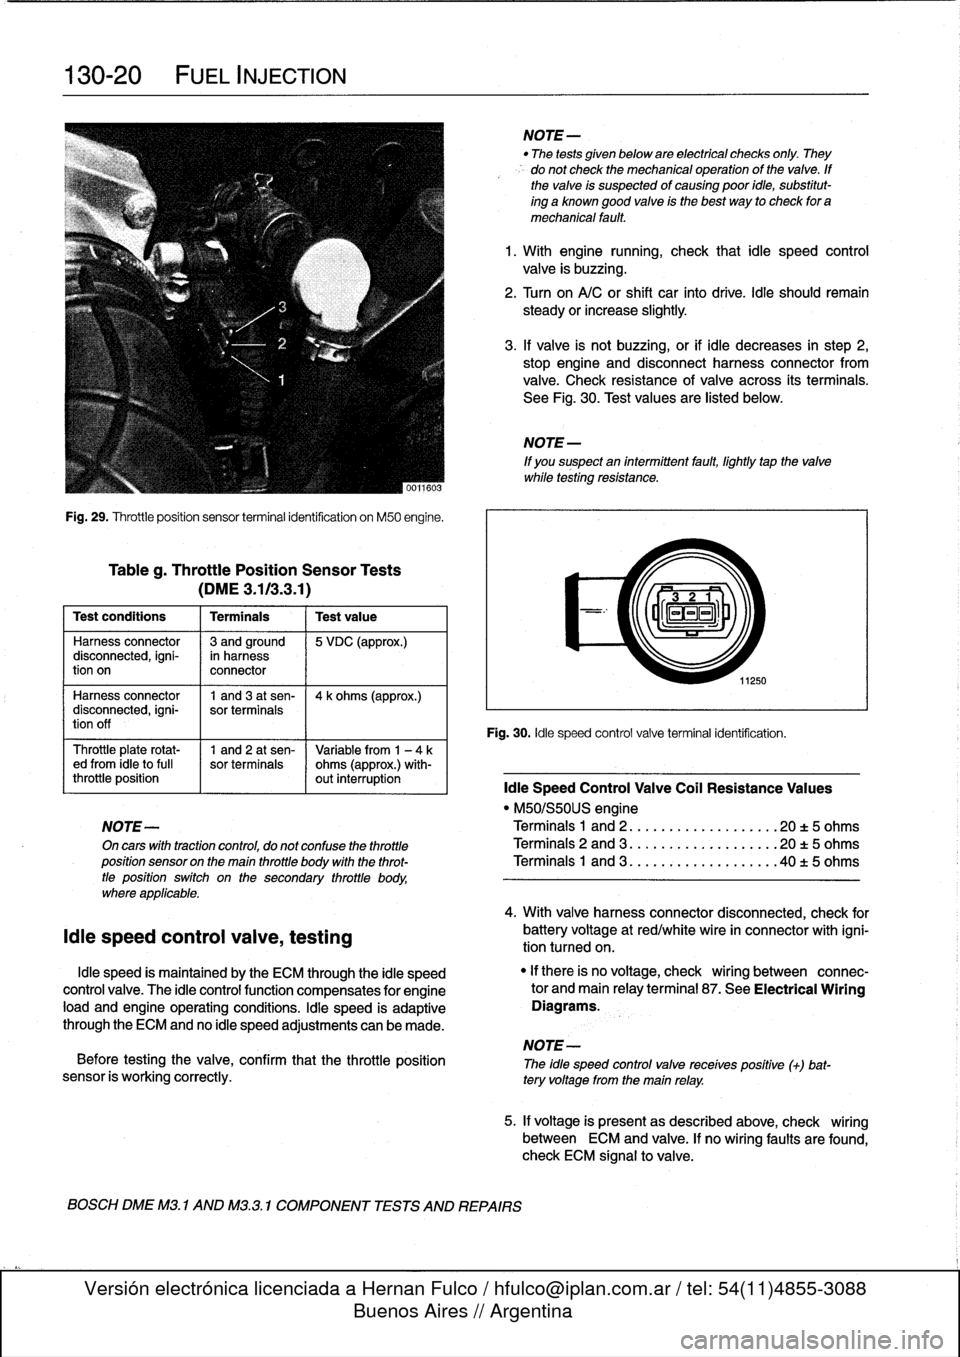 BMW 318i 1997 E36 Workshop Manual 
130-20

	

FUEL
INJECTION

Fig
.
29
.
Throttleposition
sensor
terminal
identification
on
M50
engine
.

Tableg
.
Throttle
Position
Sensor
Tests

(DME3
.113
.3
.1)

Test
conditions

	

I
Terminals

	

